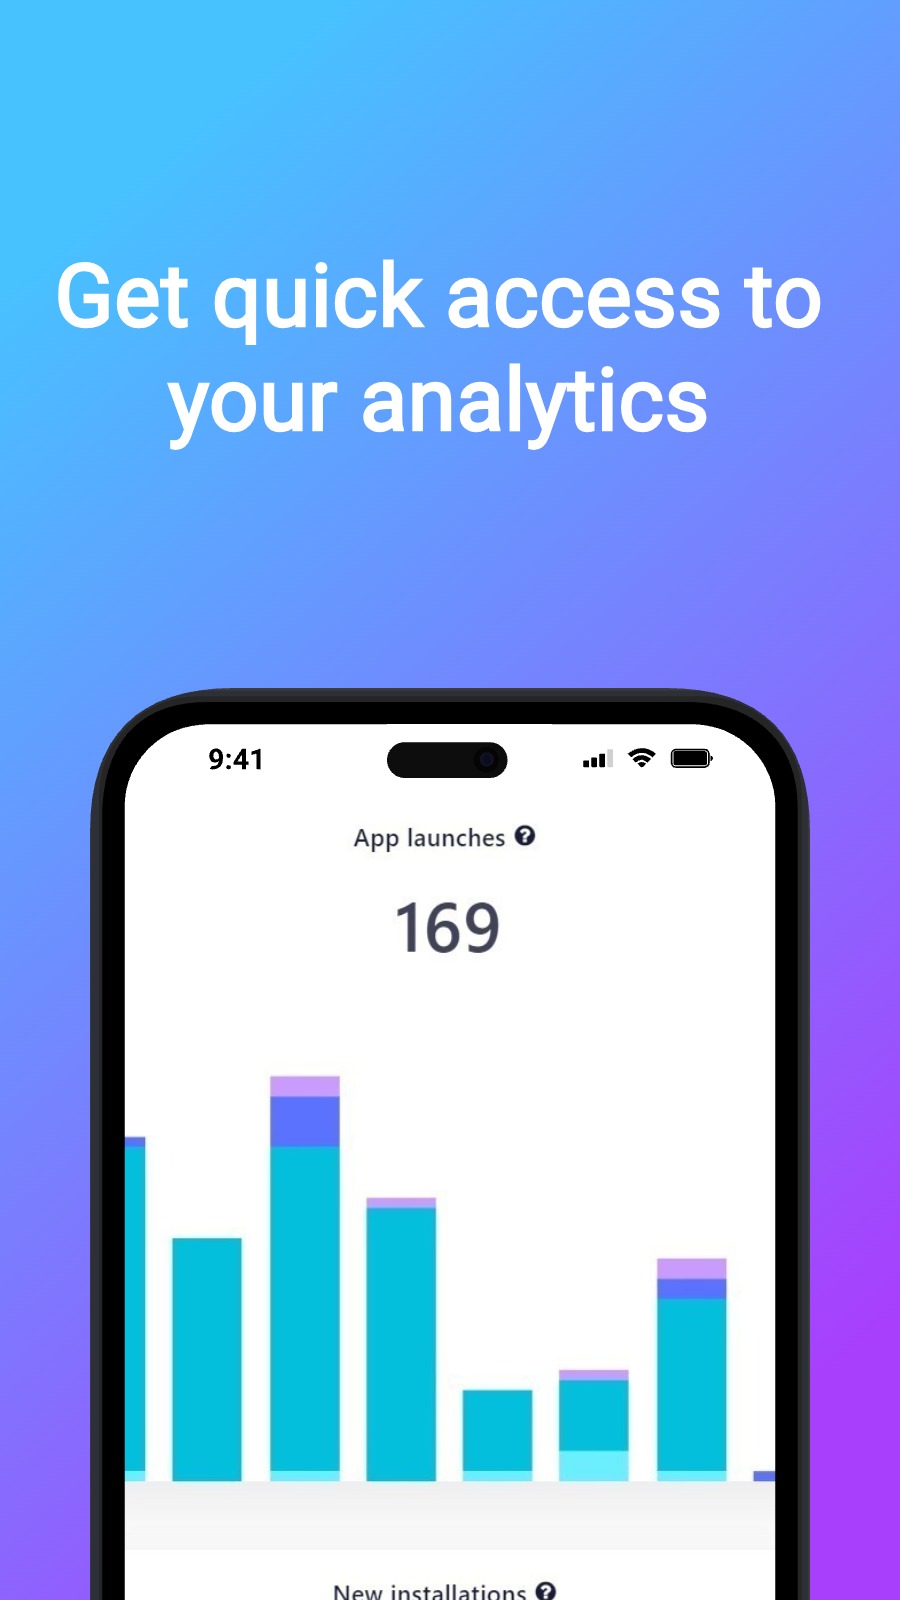 Get quick access to your analytics